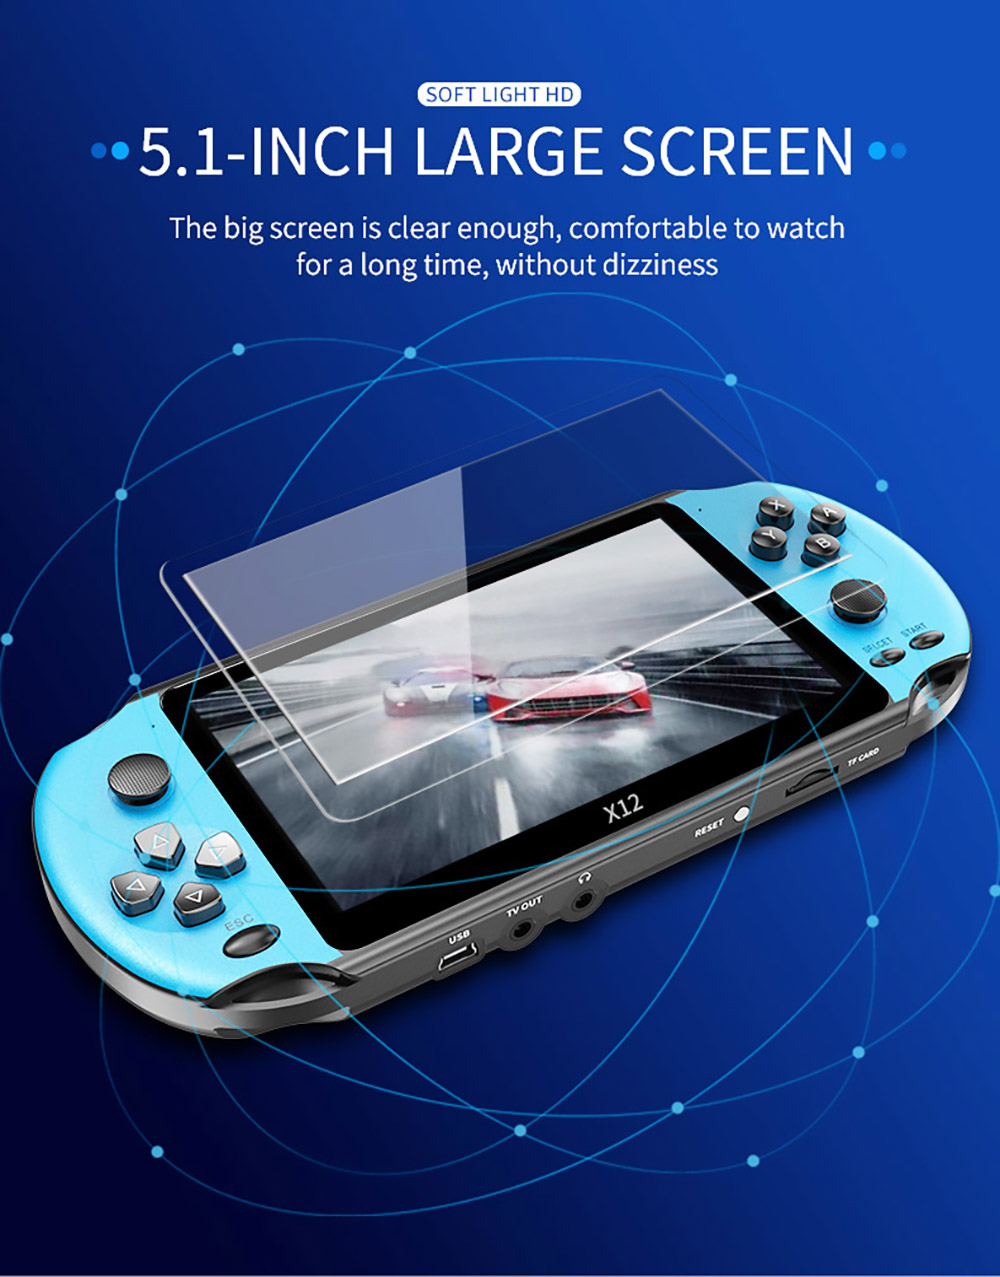 Powkiddy X12 Retro Handheld Game Console 5.1 inch IPS Screen Built-in 8GB Storage - Blue Red